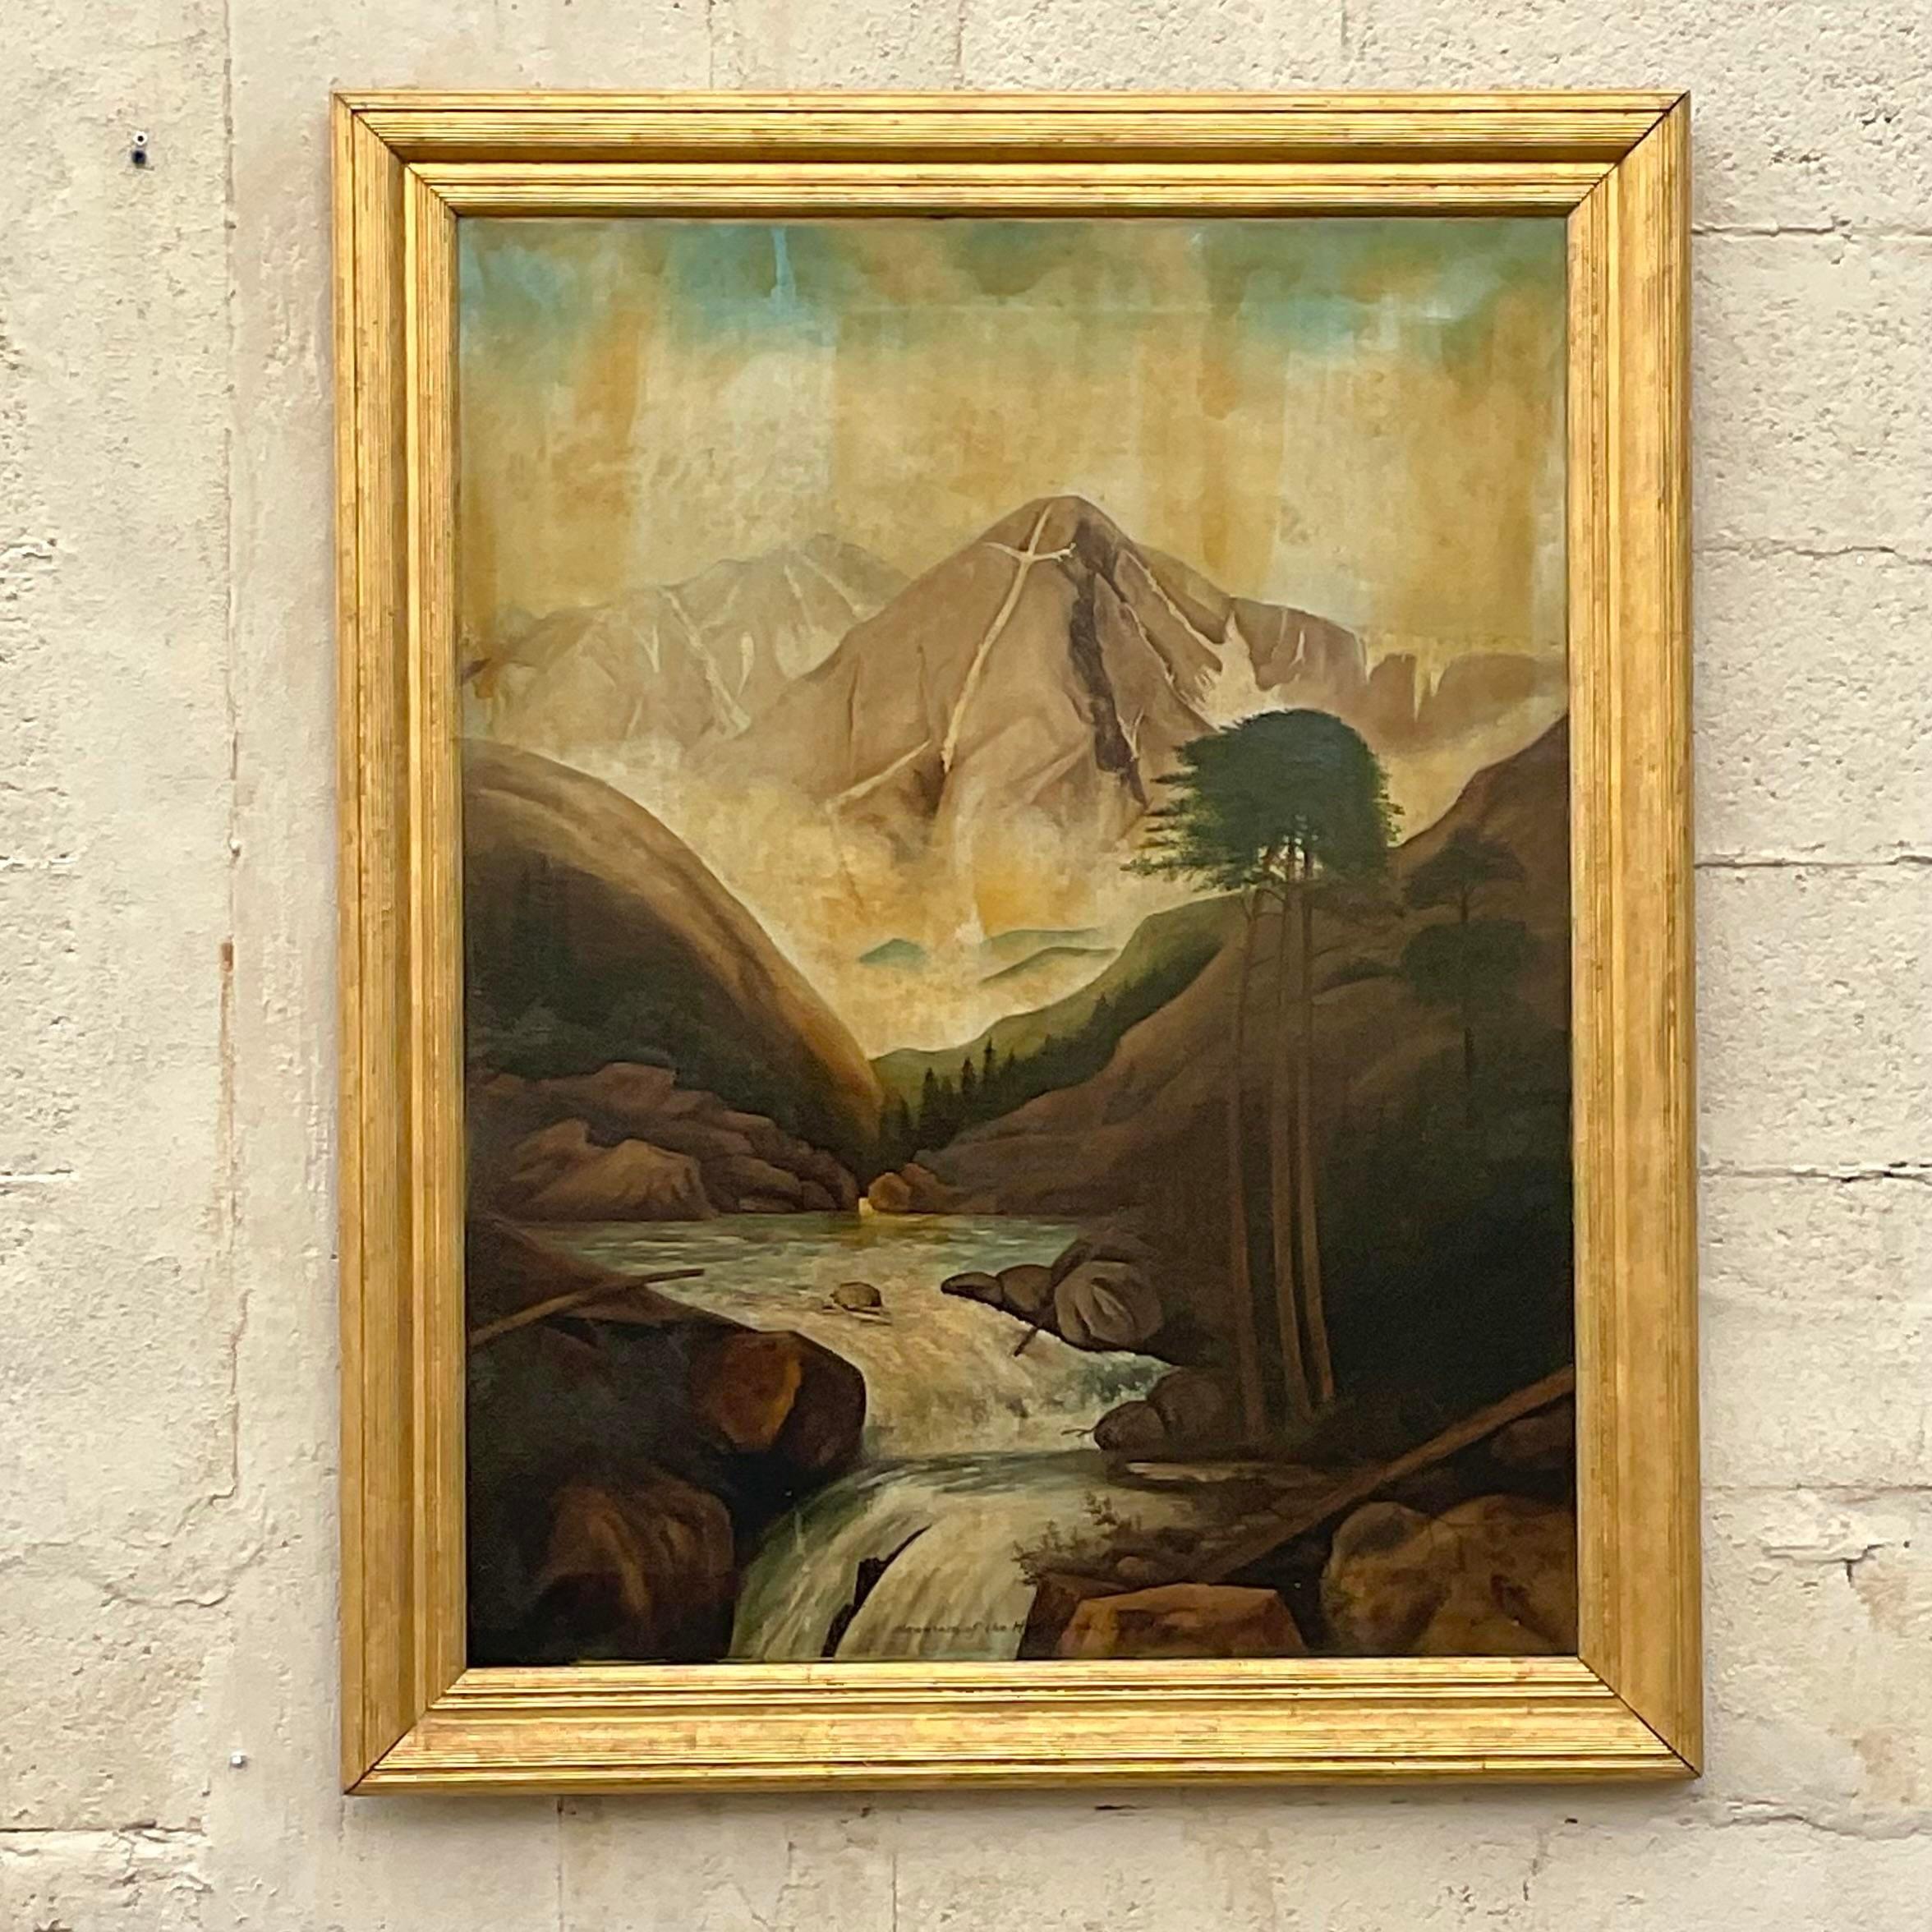 Vintage 1912 Signed Oil Painting on Canvas “Colorado Mount of the Holy Cross” For Sale 1